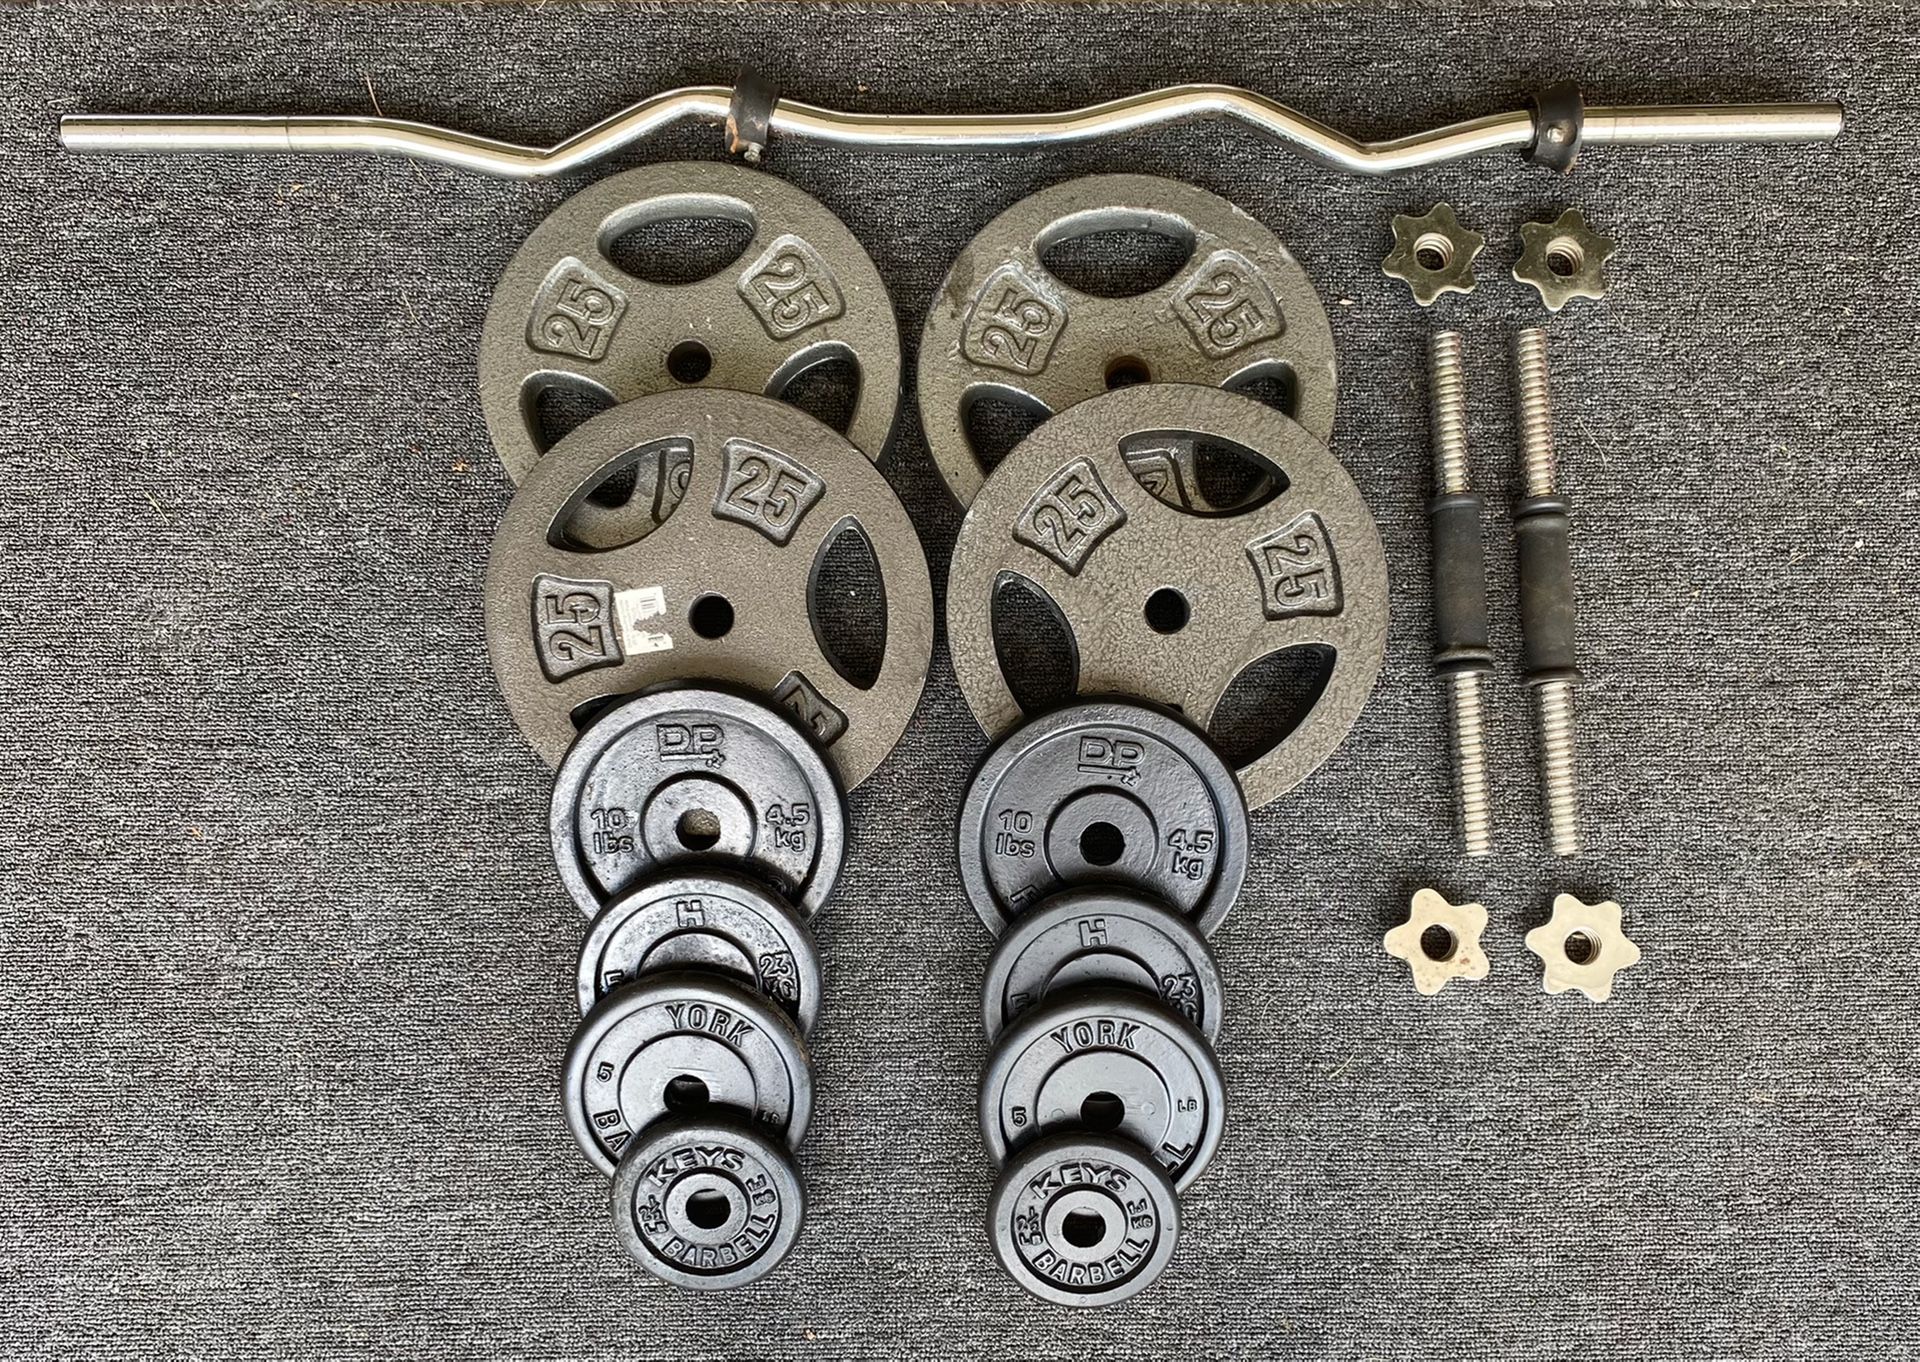 Weights 145LBS with Curl Bar and Handle Bars